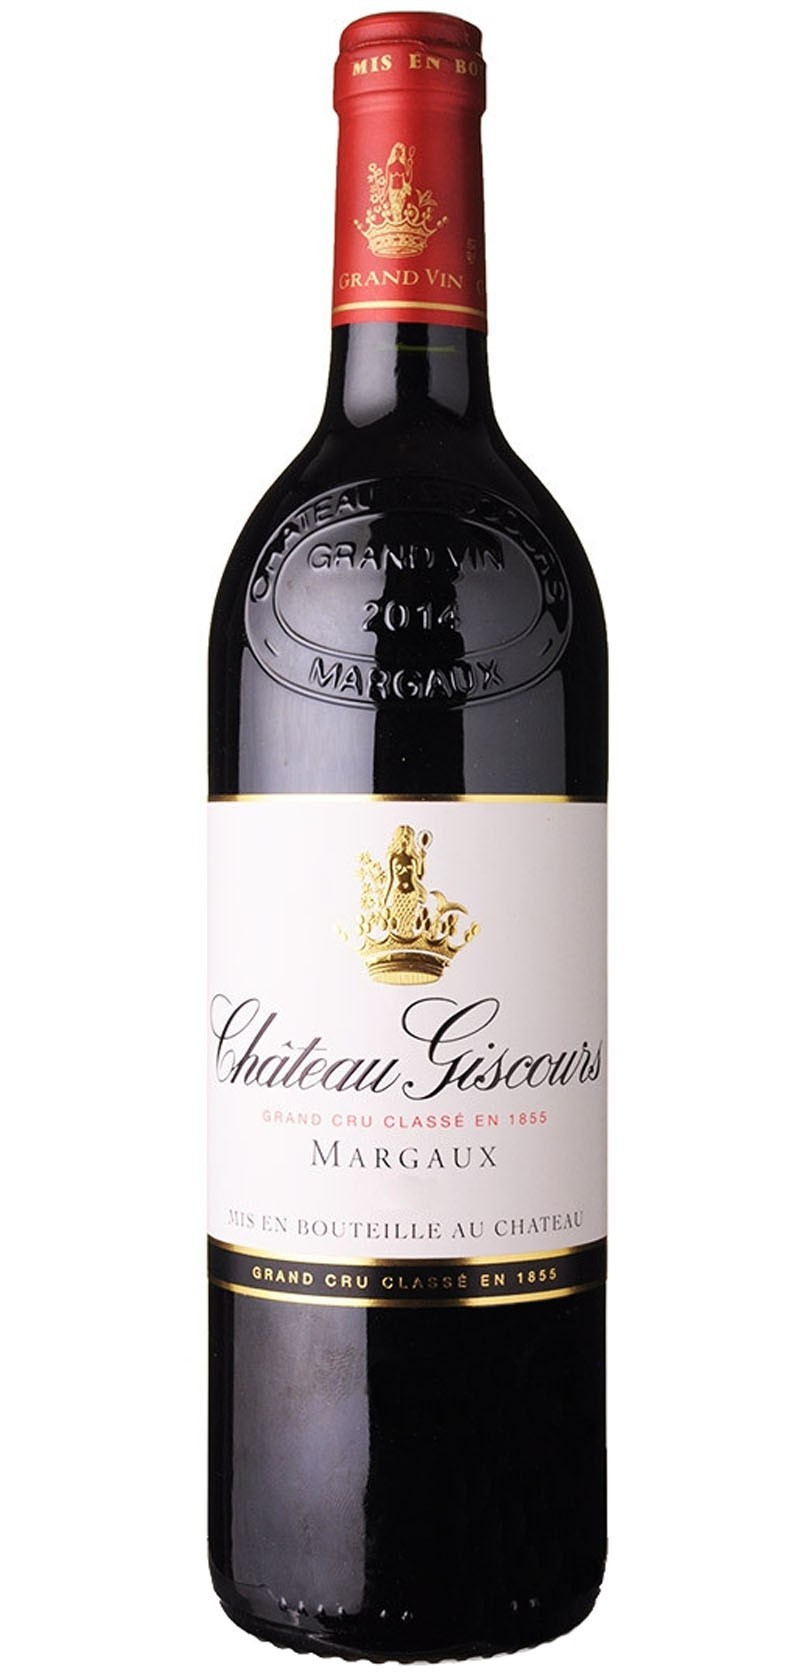 2015 Chateau Giscours, Margaux